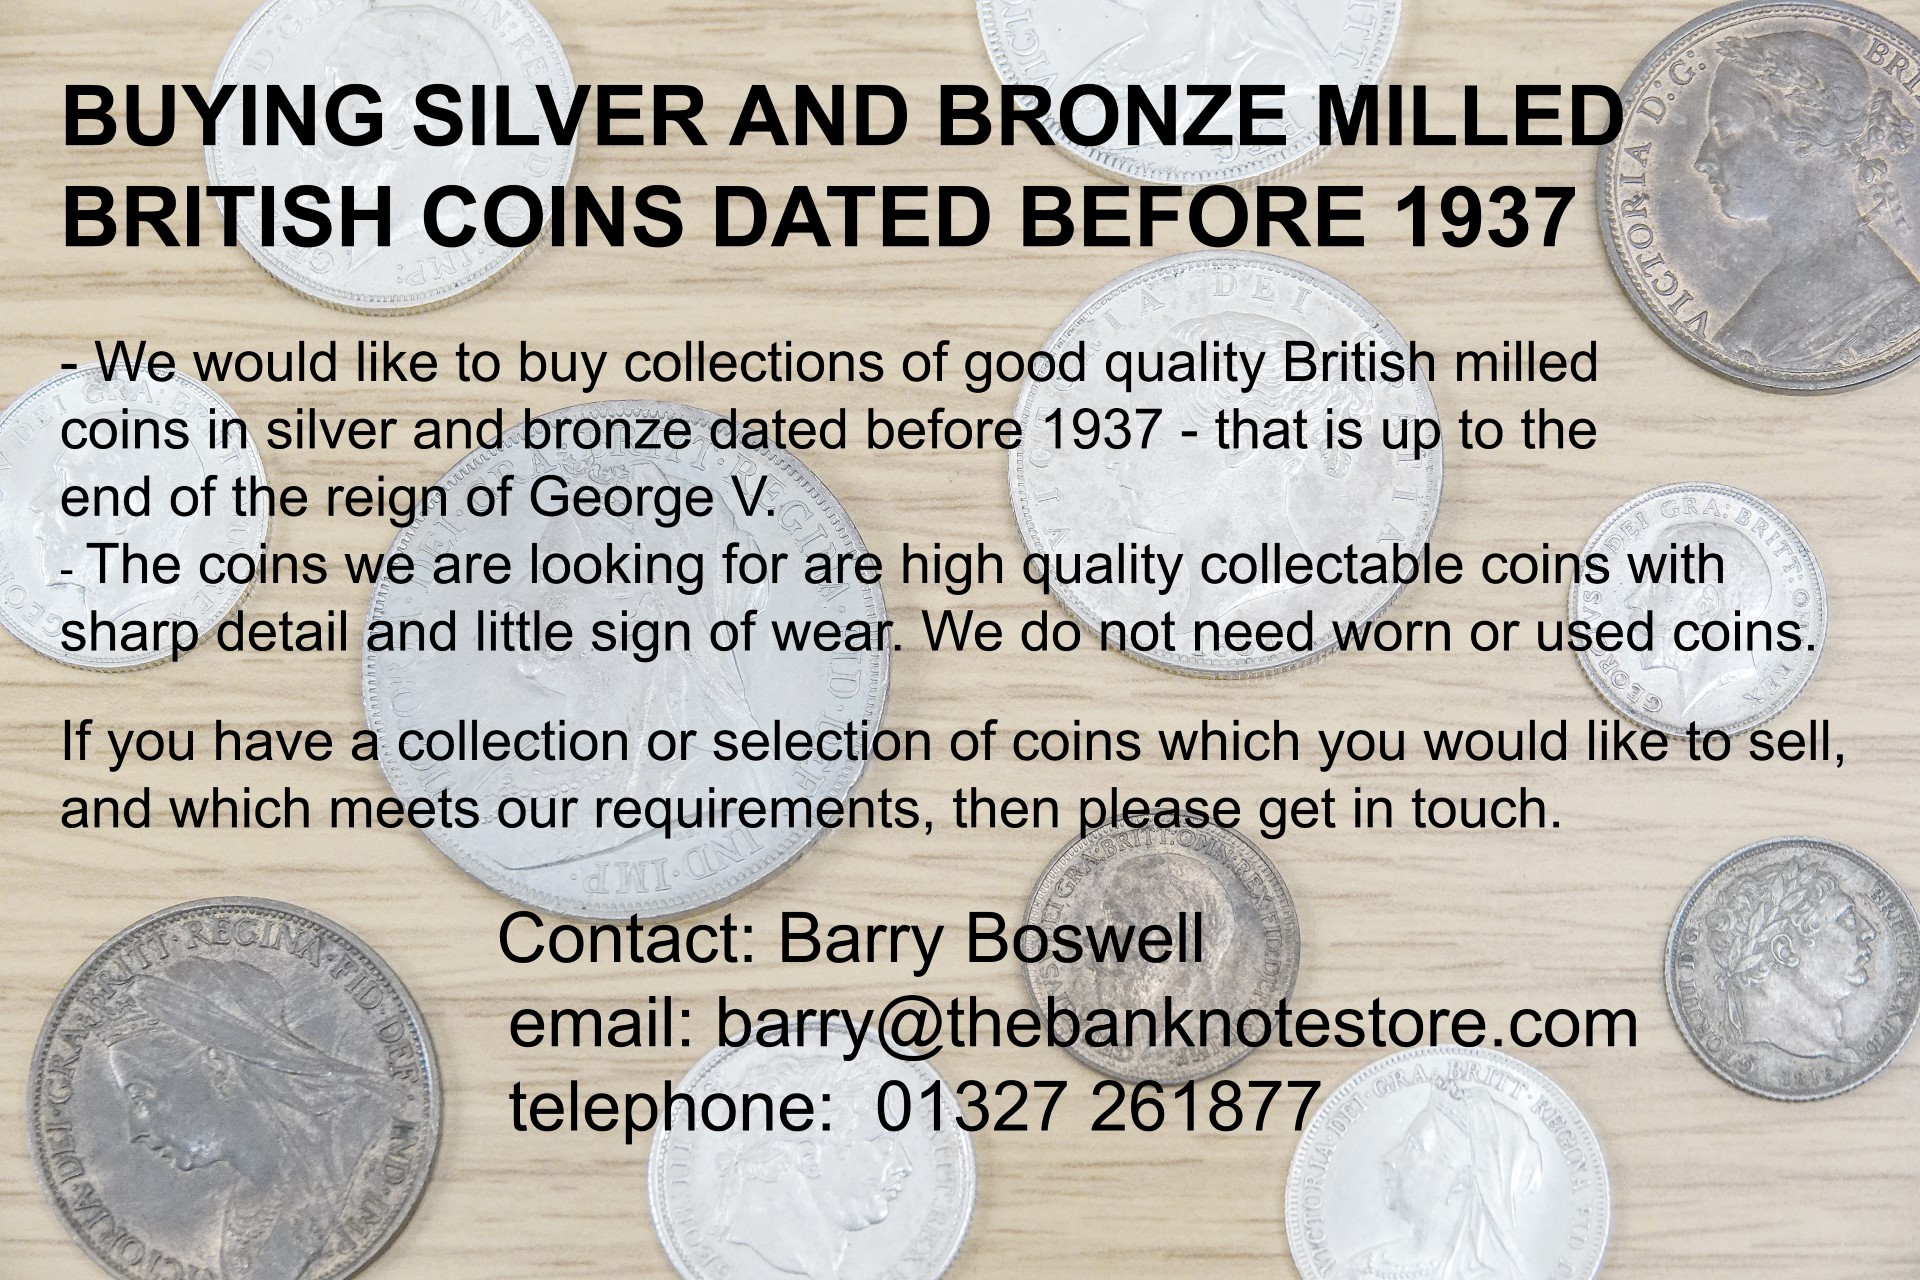 We would like to buy collections of good quality British milled coins in silver and bronze dated before 1937